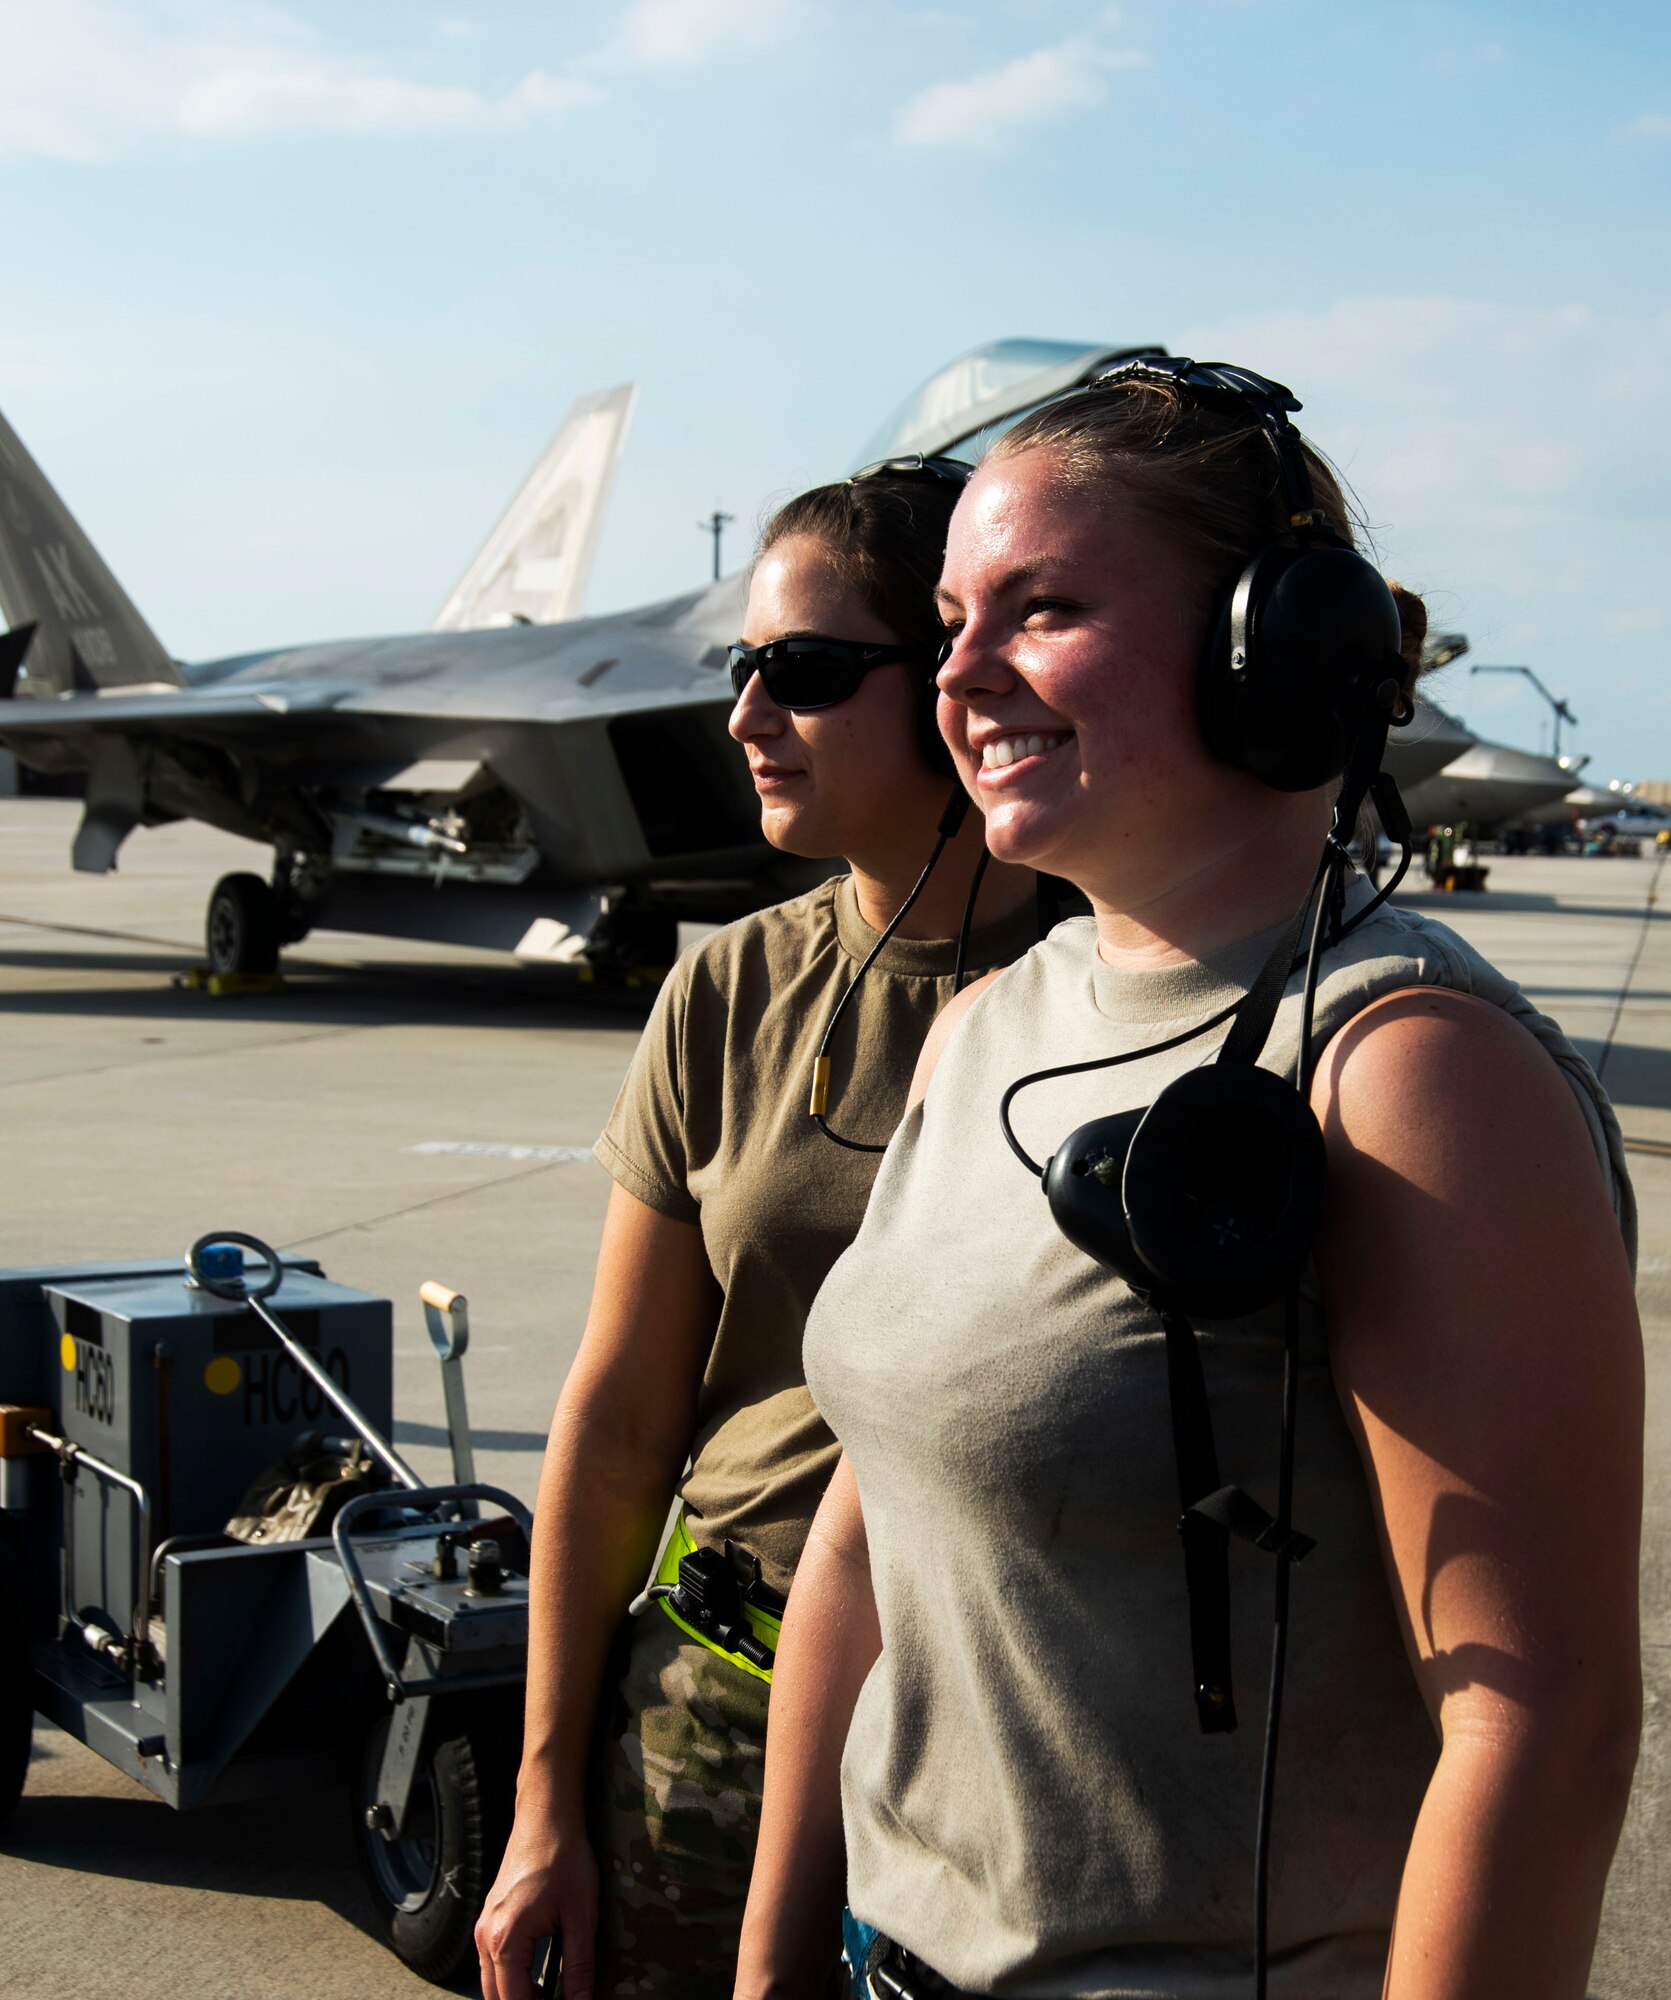 Two Airmen support aircraft operations on the flight line Nov. 6, 2019, at Tyndall Air Force Base, Florida. Tyndall supported Checkered Flag 20-1, which is a large-scale aerial exercise designed to integrate fourth and fifth-generation airframes to enhance mobility, deployment, and employment capabilities of aviators and maintainers. The exercise involved airpower assets, more than 50 aircraft, and support personnel from multiple installations. Aircraft and pilots participated in a Weapons System Evaluation Program and are evaluated on air-to-air and air-to-ground operations, providing a unique training environment. (U.S. Air Force photo by Staff Sgt. Magen M. Reeves)